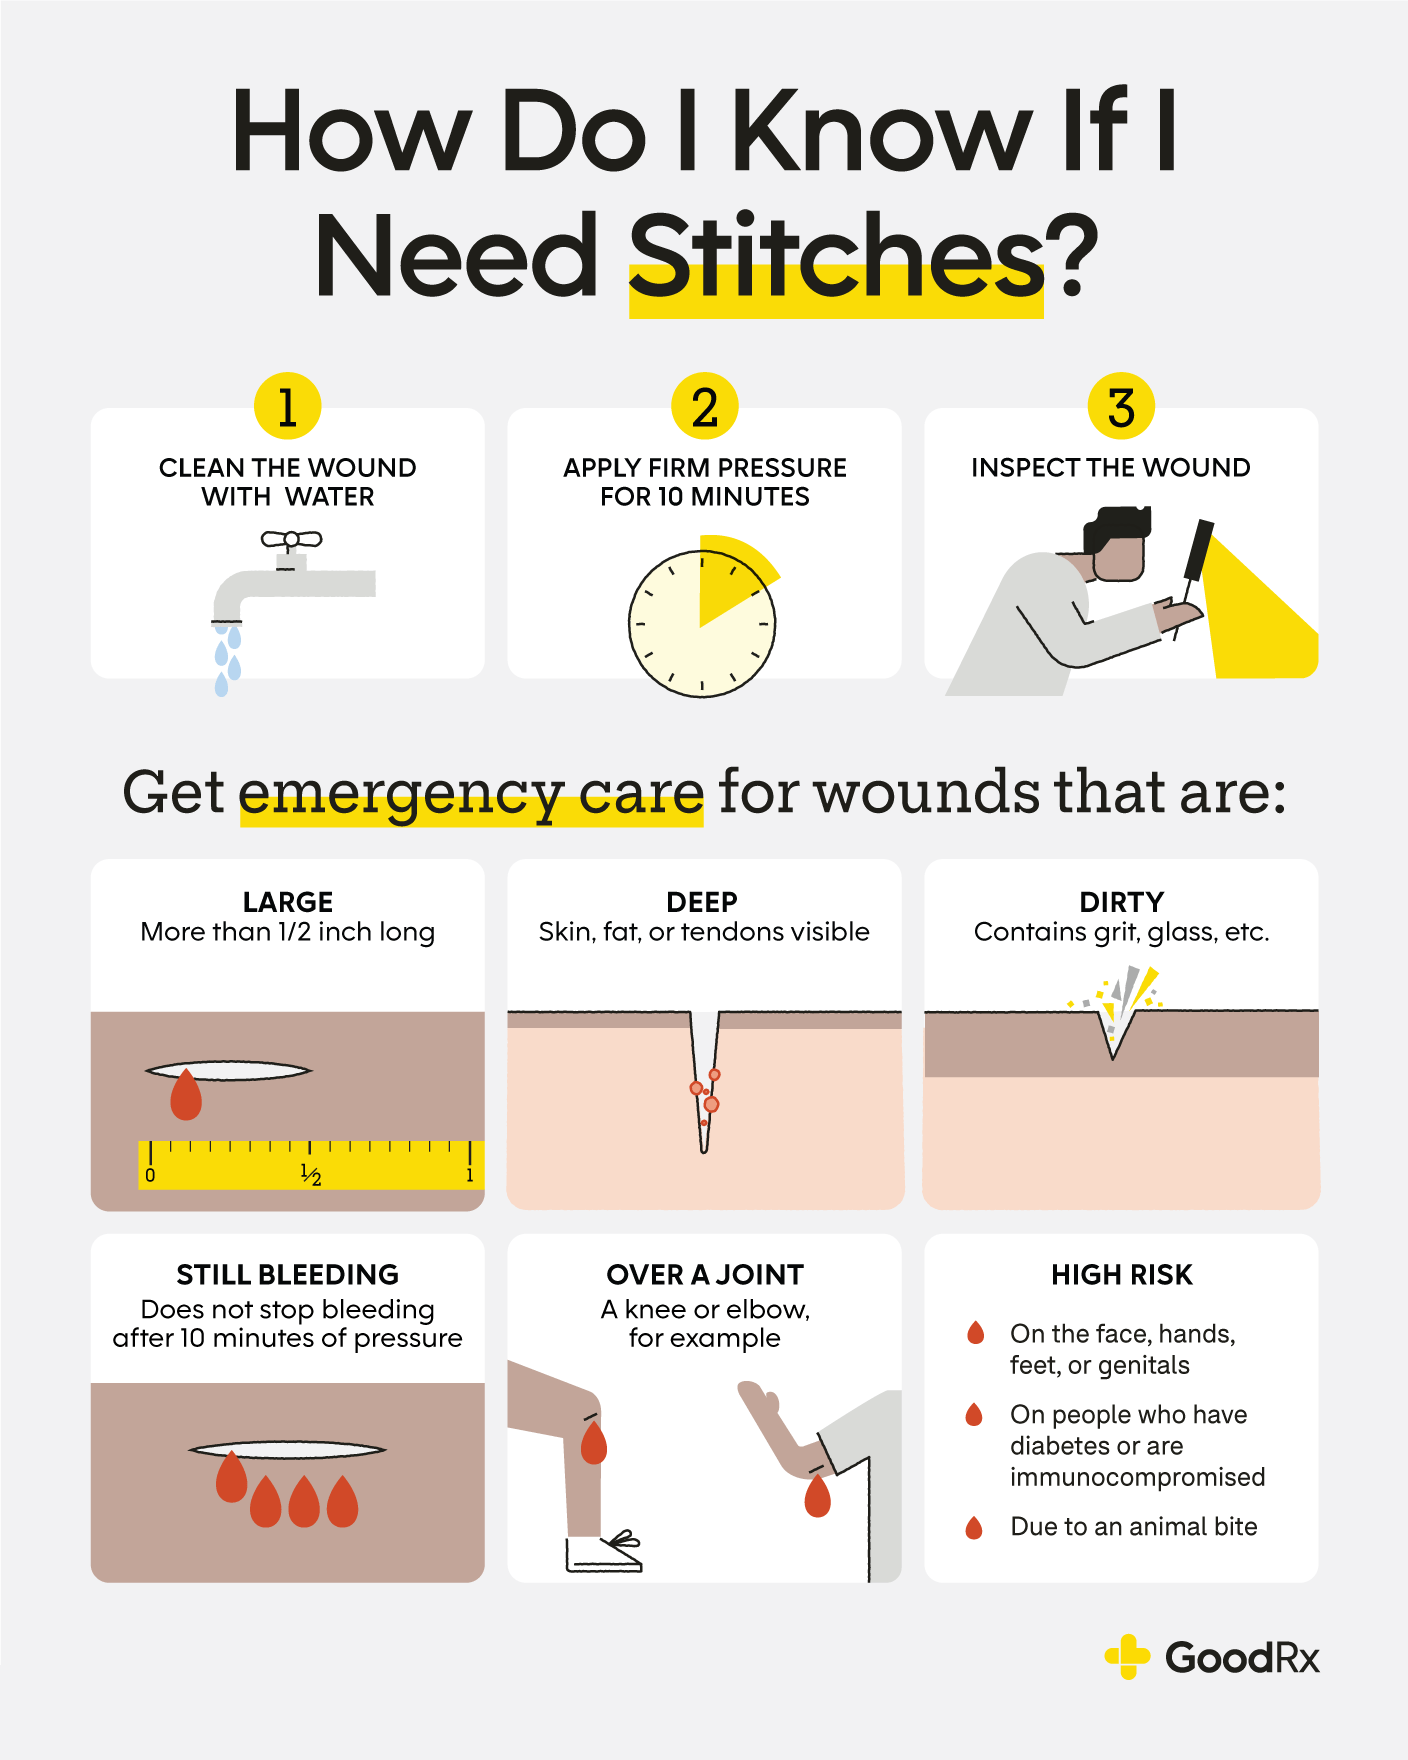 Do I Need Stitches? Here's How To Know